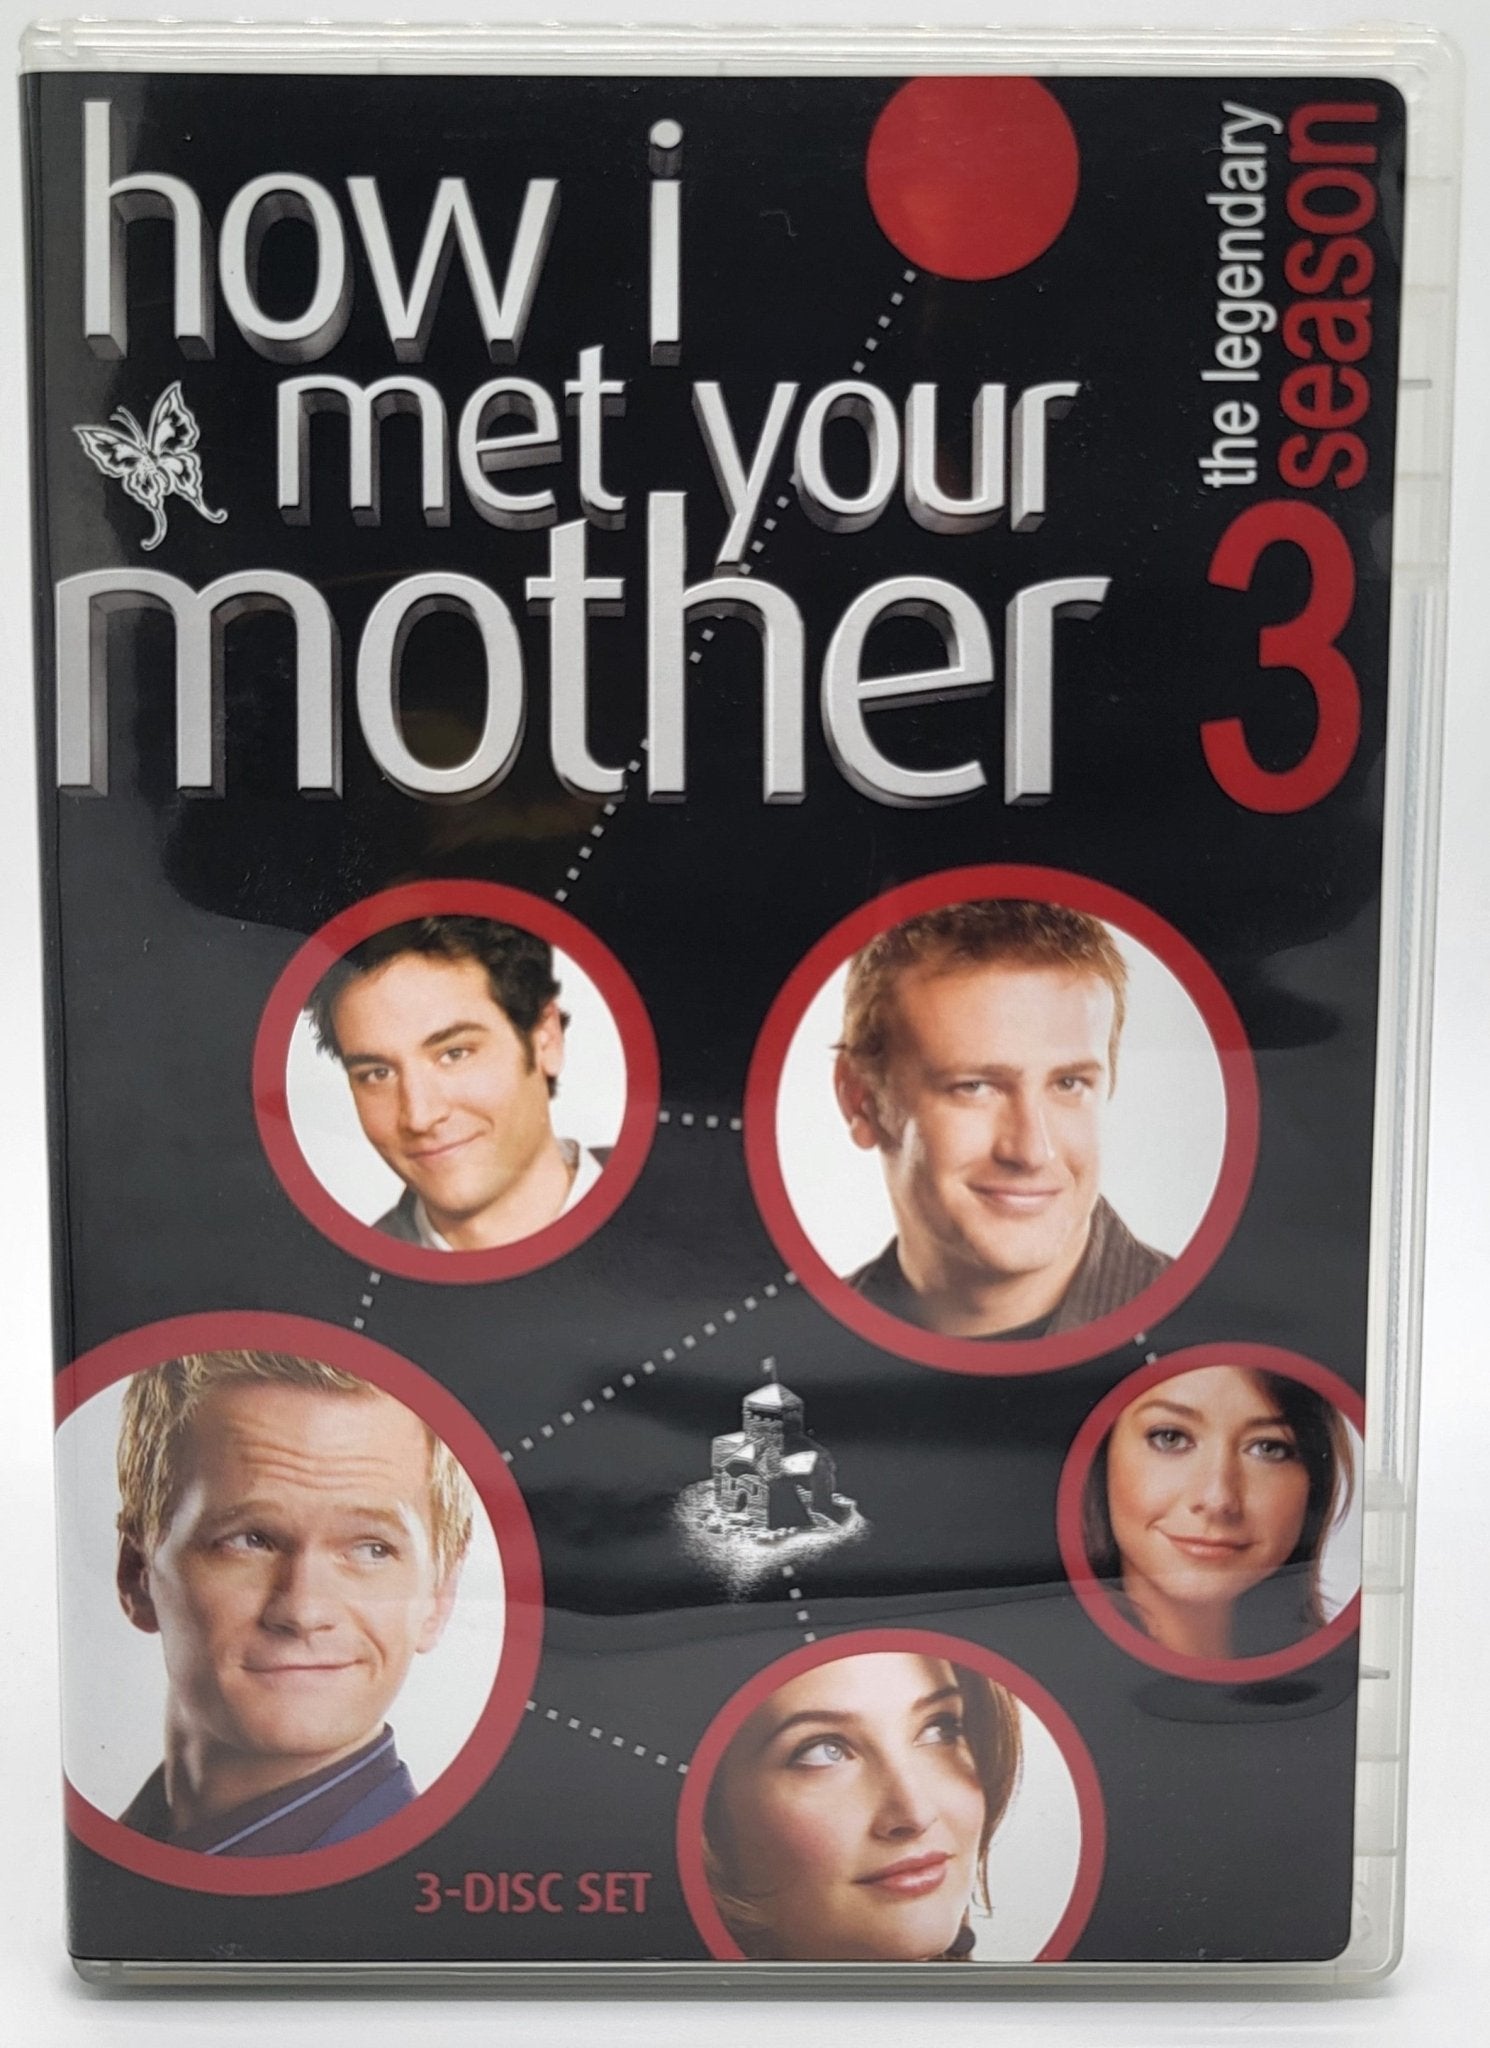 20th Century Fox Home Entertainment - How I met your mother | DVD | The Complete Season 3 - DVD - Steady Bunny Shop